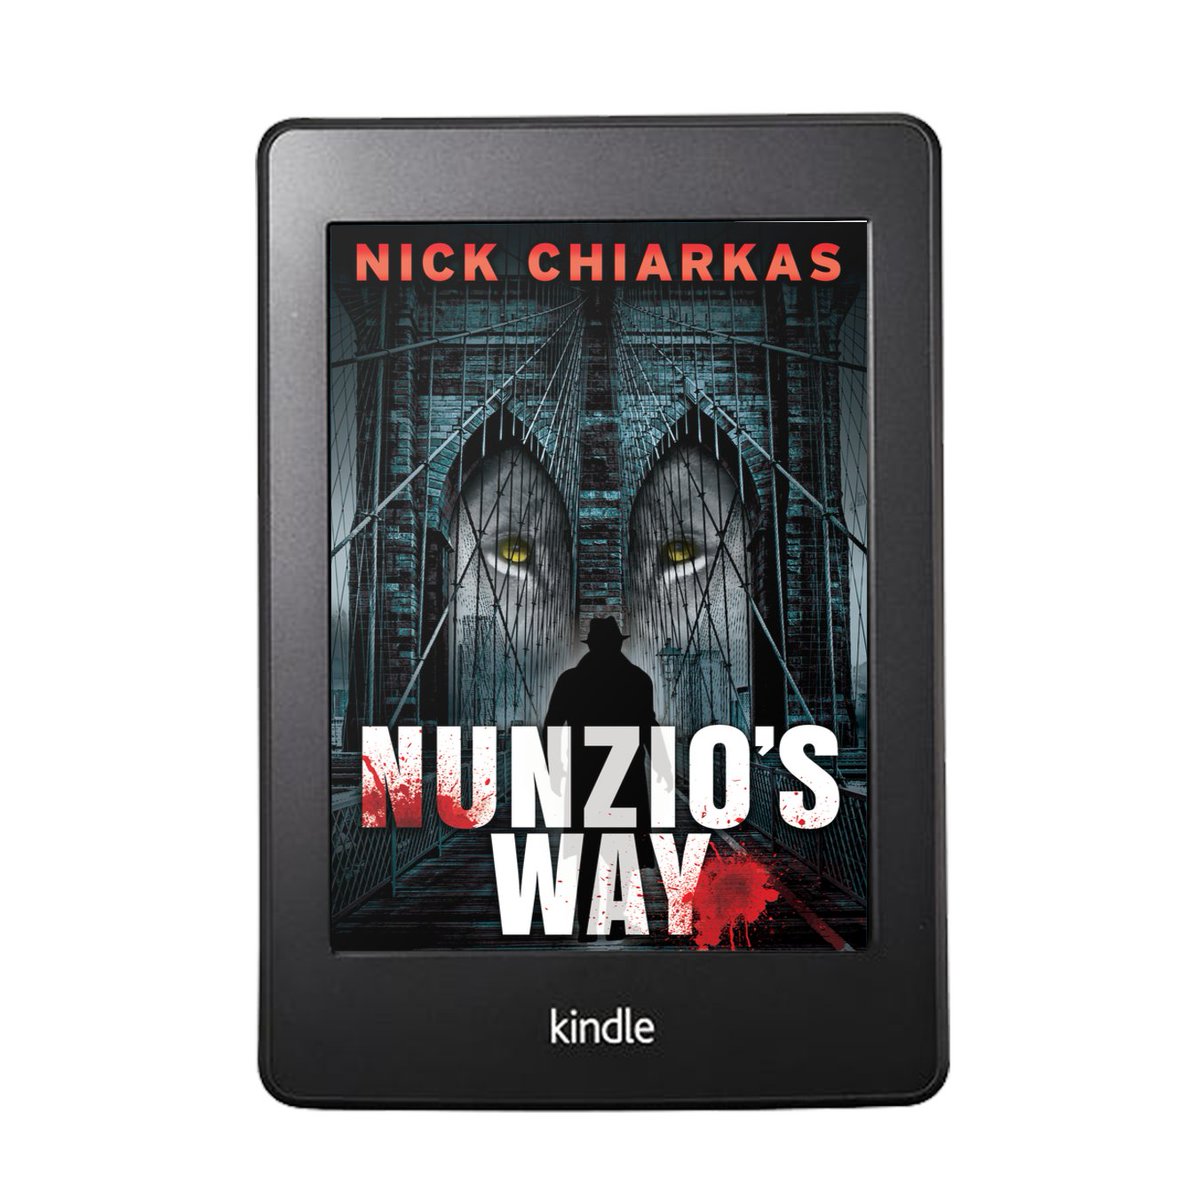 Visit @celticlady1953 's Reviews to check out this  >> Nunzio's Way by #NickChiarkas  << #BookPost with #Excerpt! bit.ly/3B2F2c7 #Weepers #NewYorkCity #Fiction #CrimeFiction #Crime #CrimeThriller #HistoricalThriller #bookstoread #bibliophile #bookhoarder @chiarkas